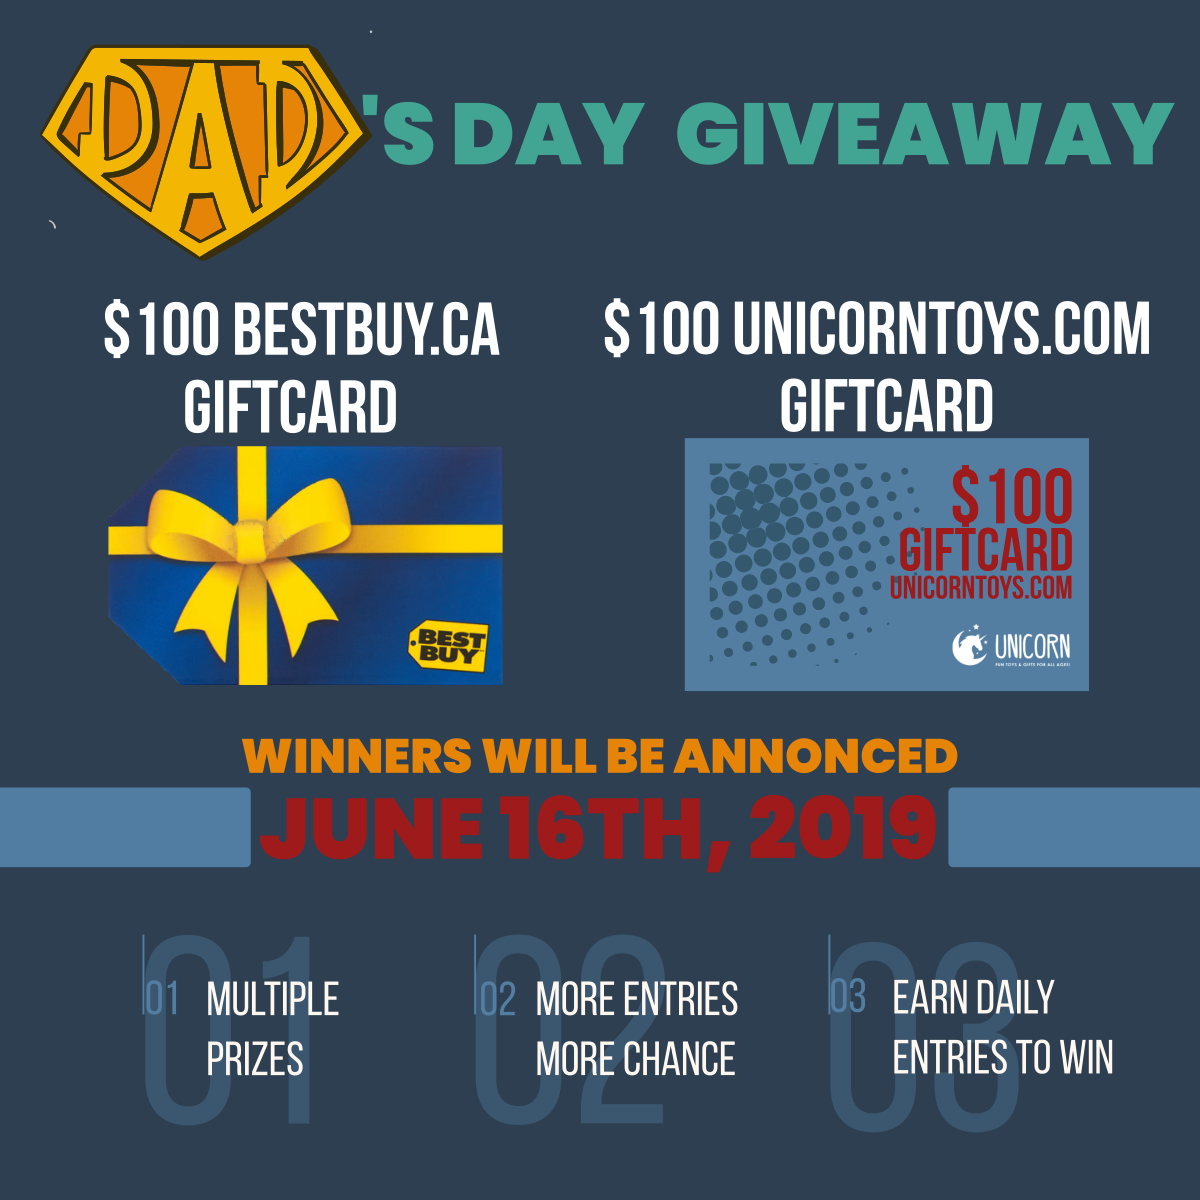 Super Dad Giveaway: Let's celebrate this Father's Day your way!